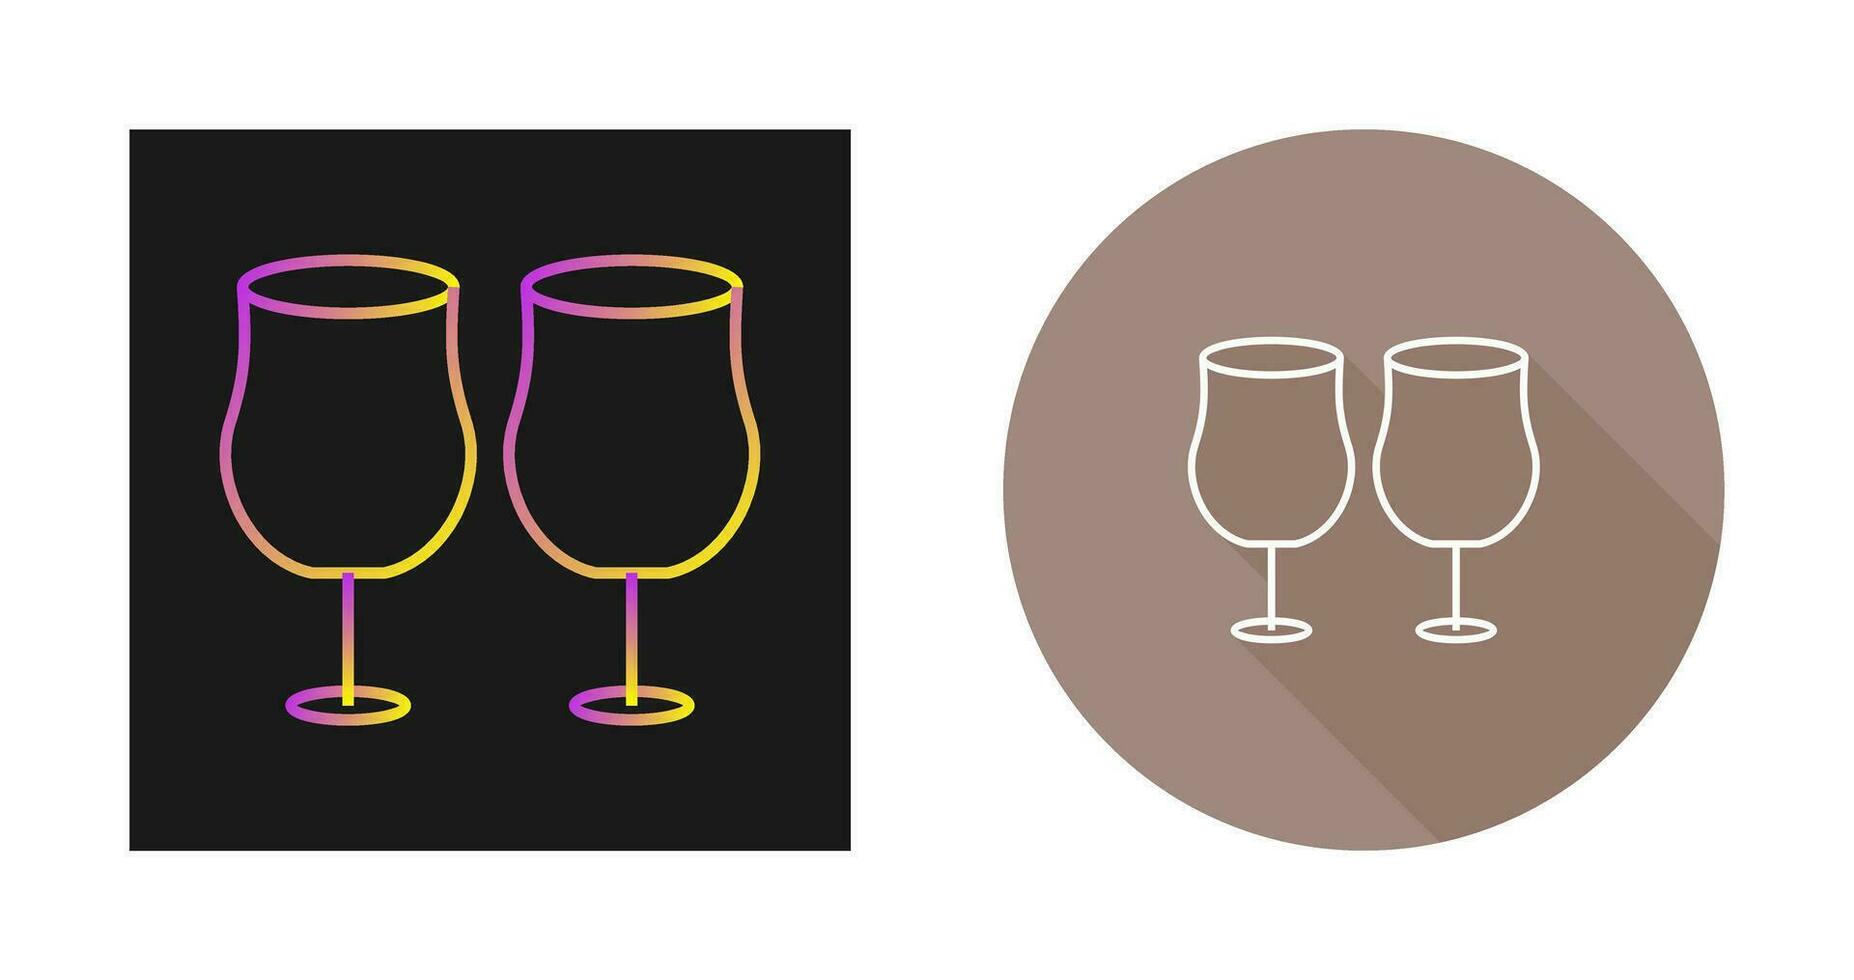 Party Glasses Vector Icon